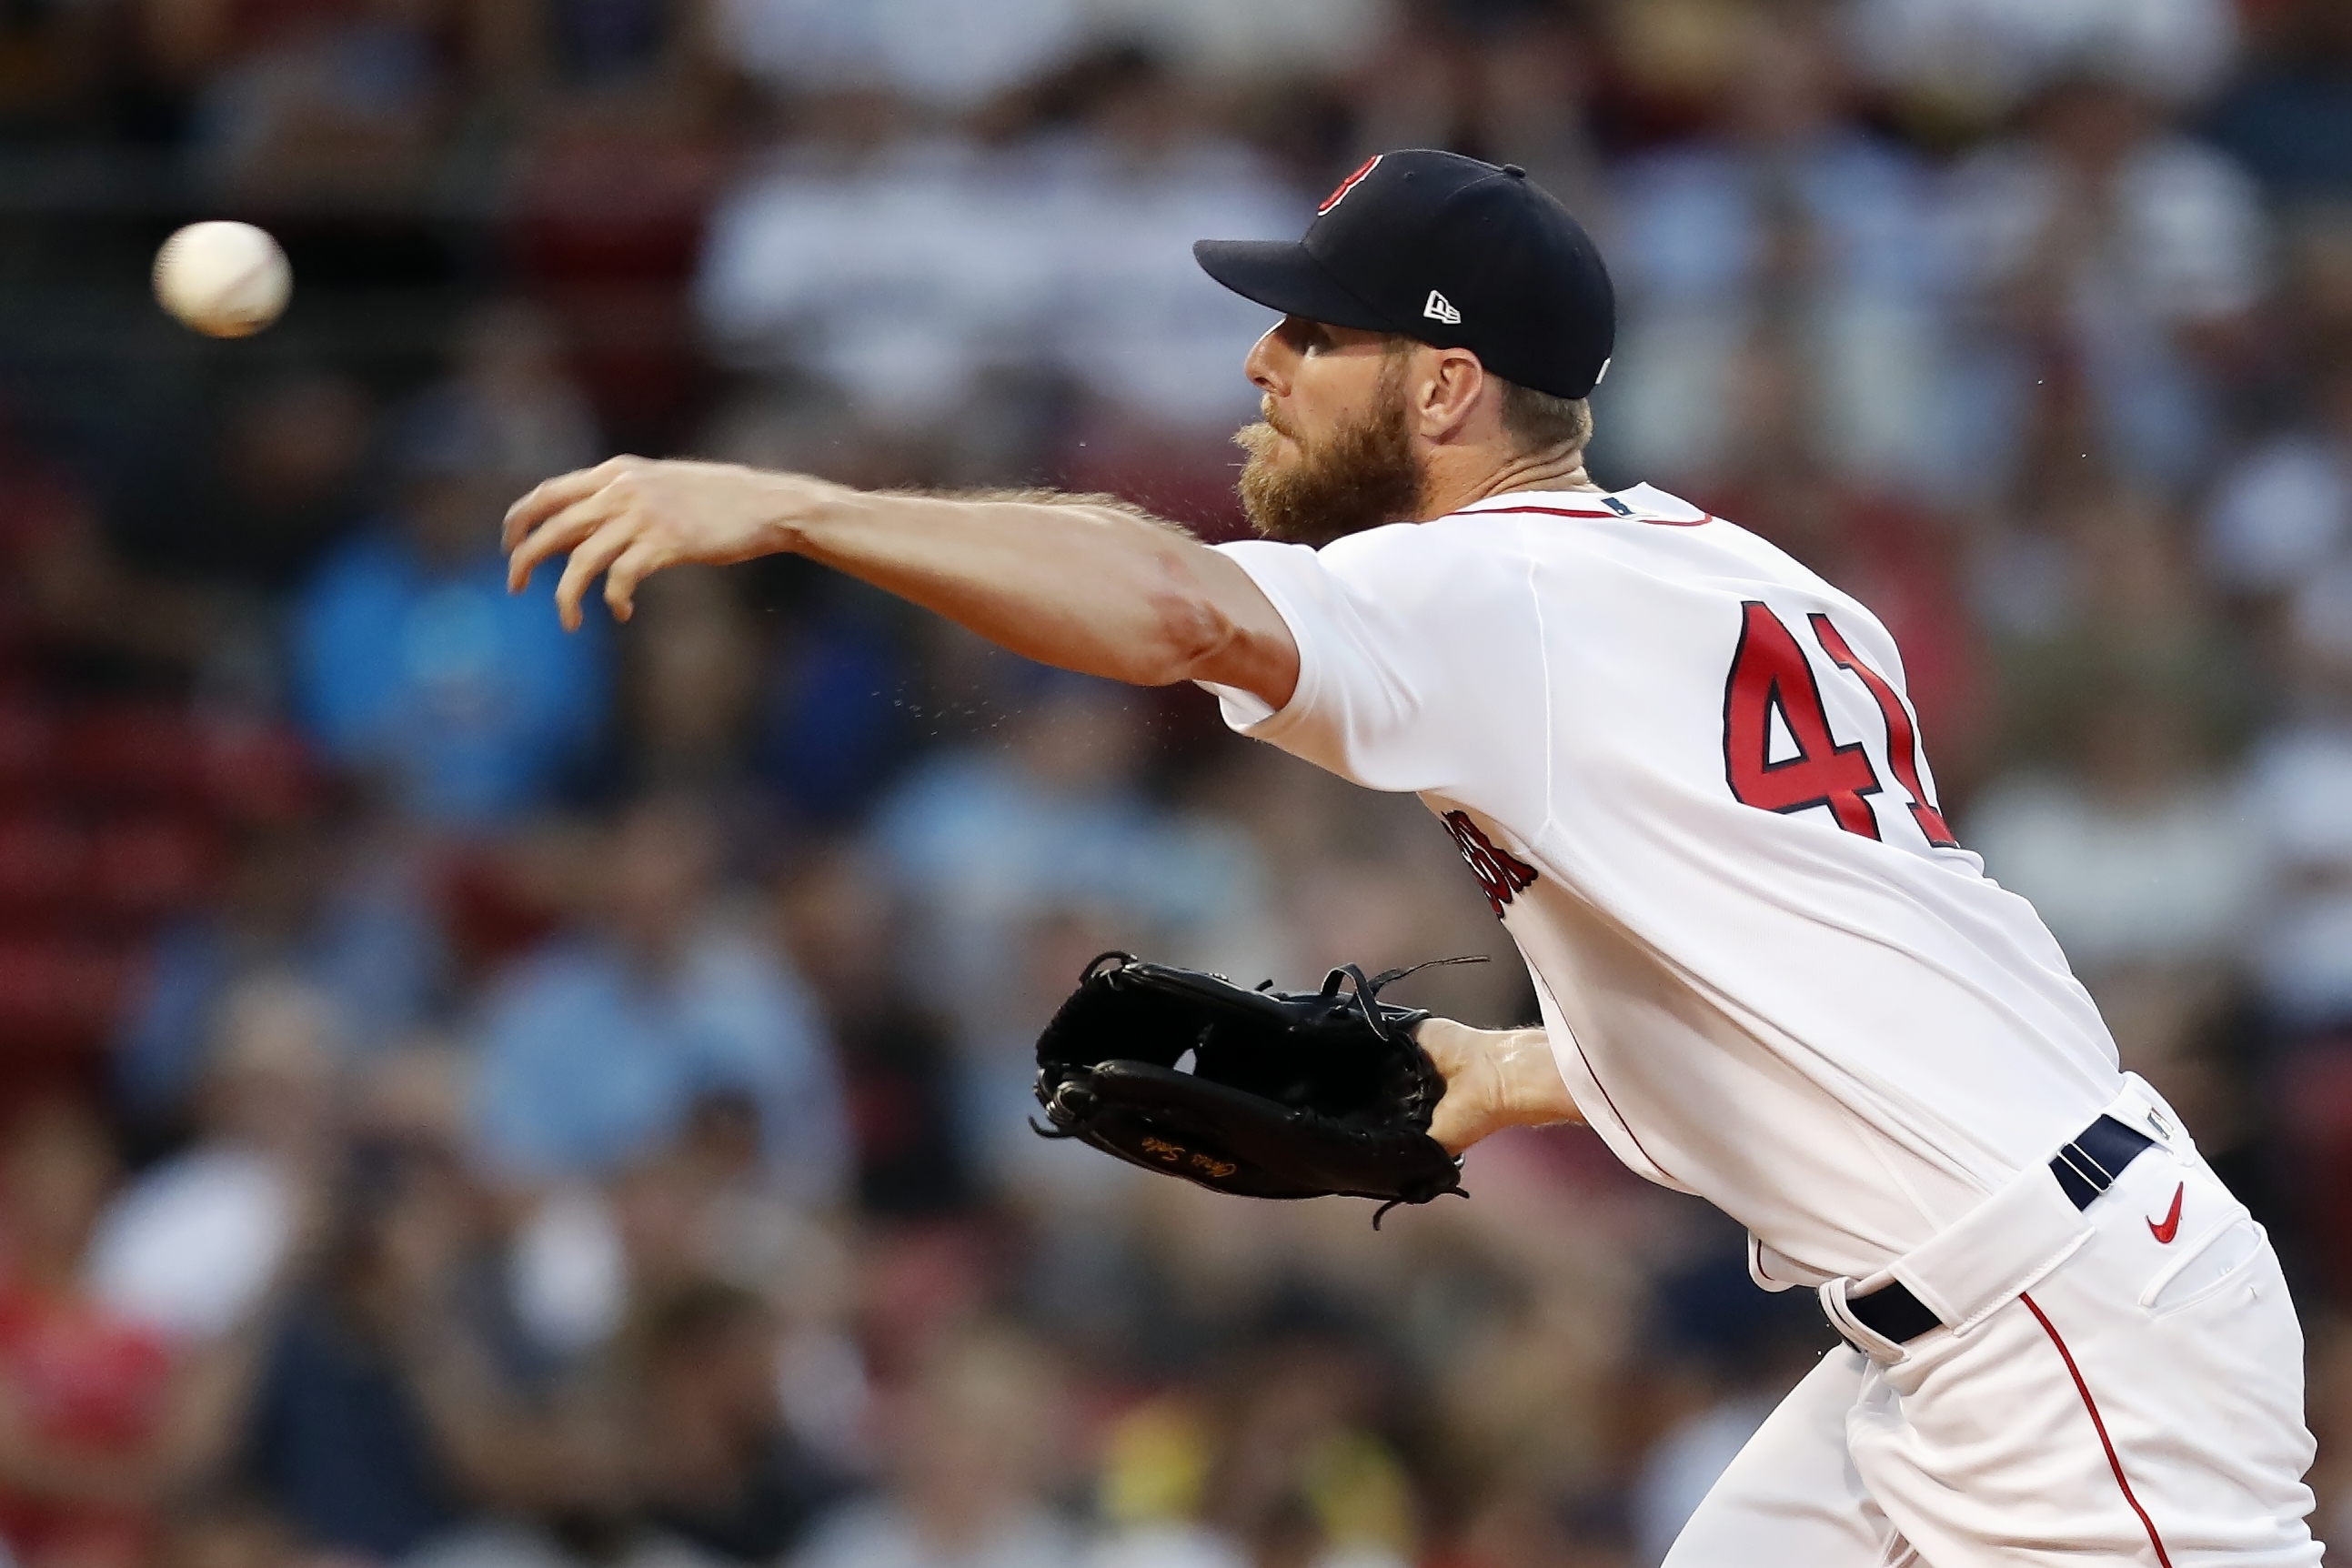 Chris Sale joins Sandy Koufax as only pitchers with 3 immaculate innings